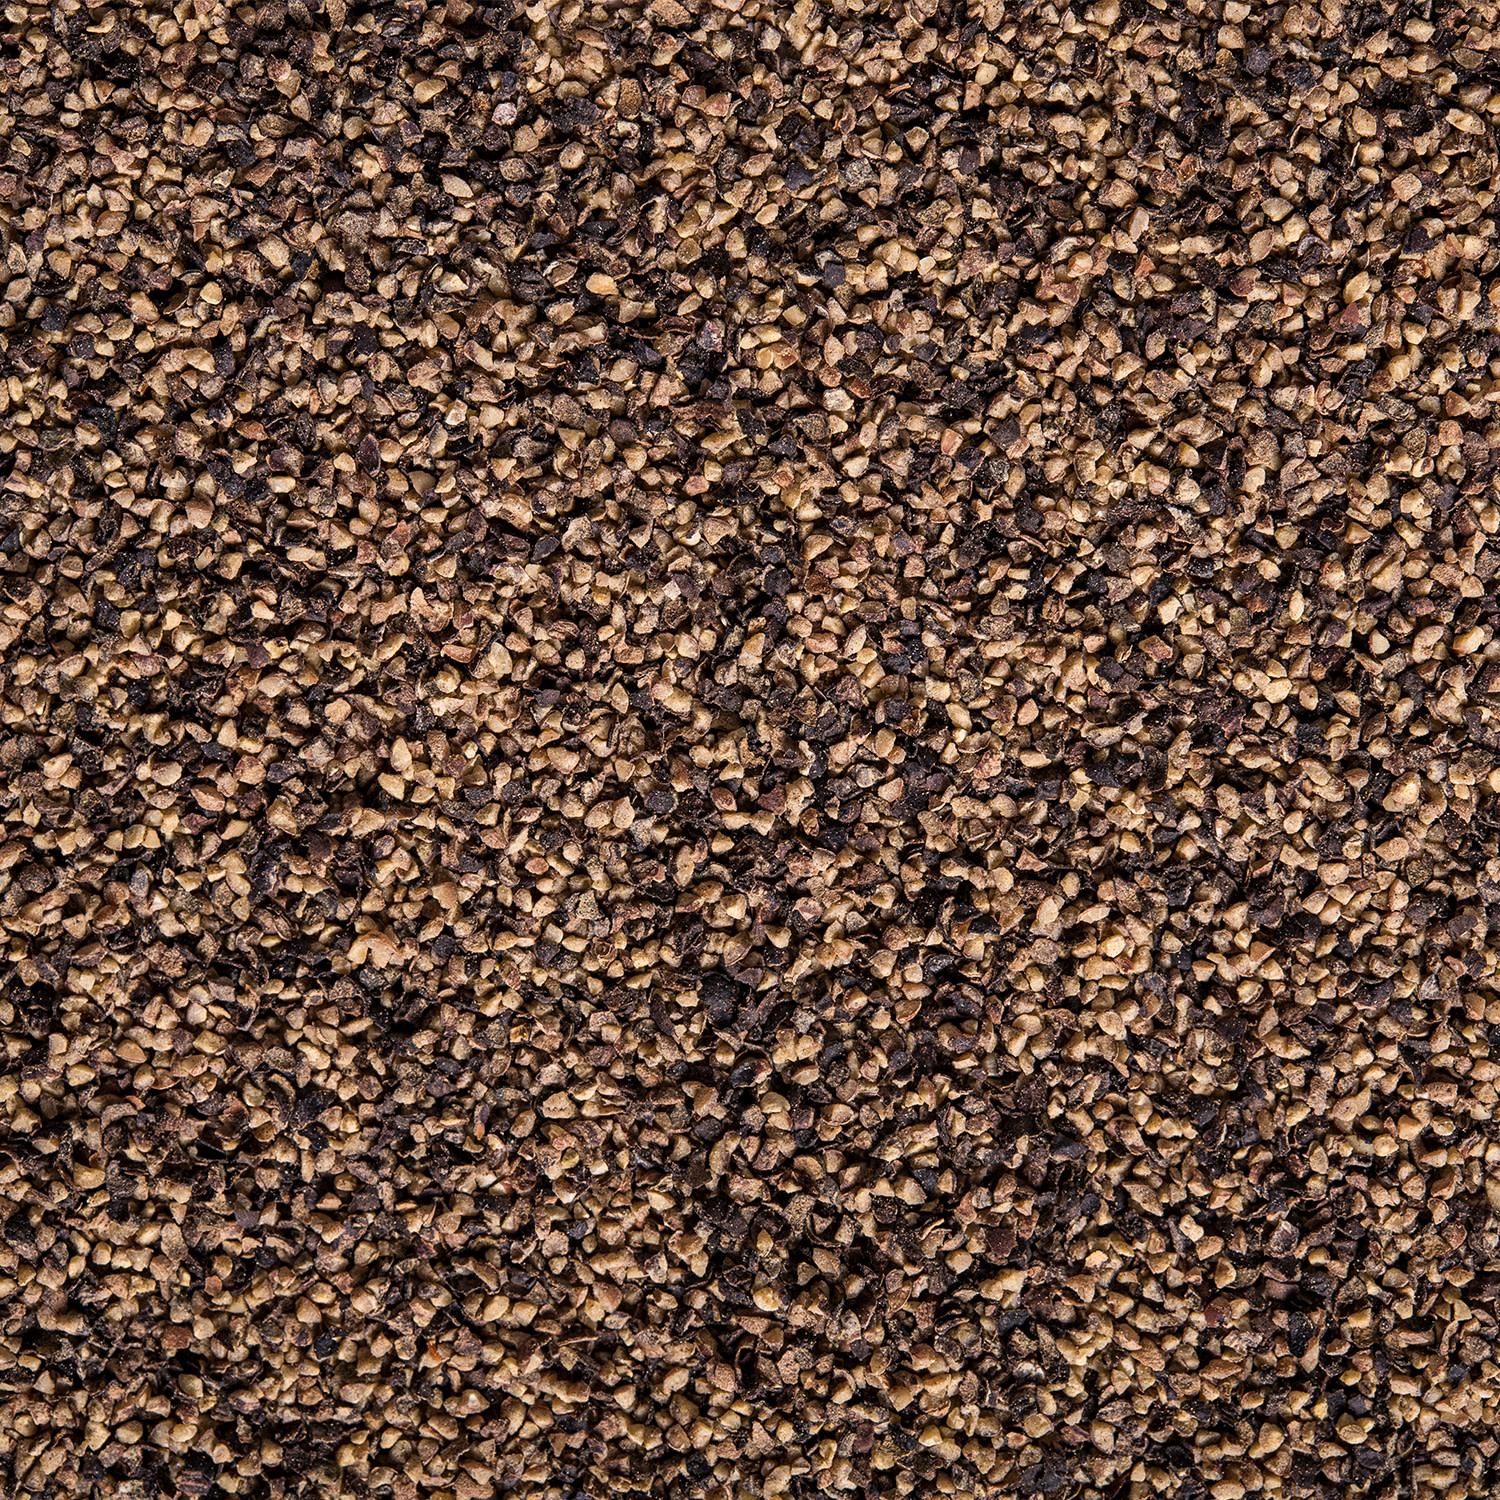 McCormick Pure Ground Black Pepper, 6 oz Can - image 3 of 11